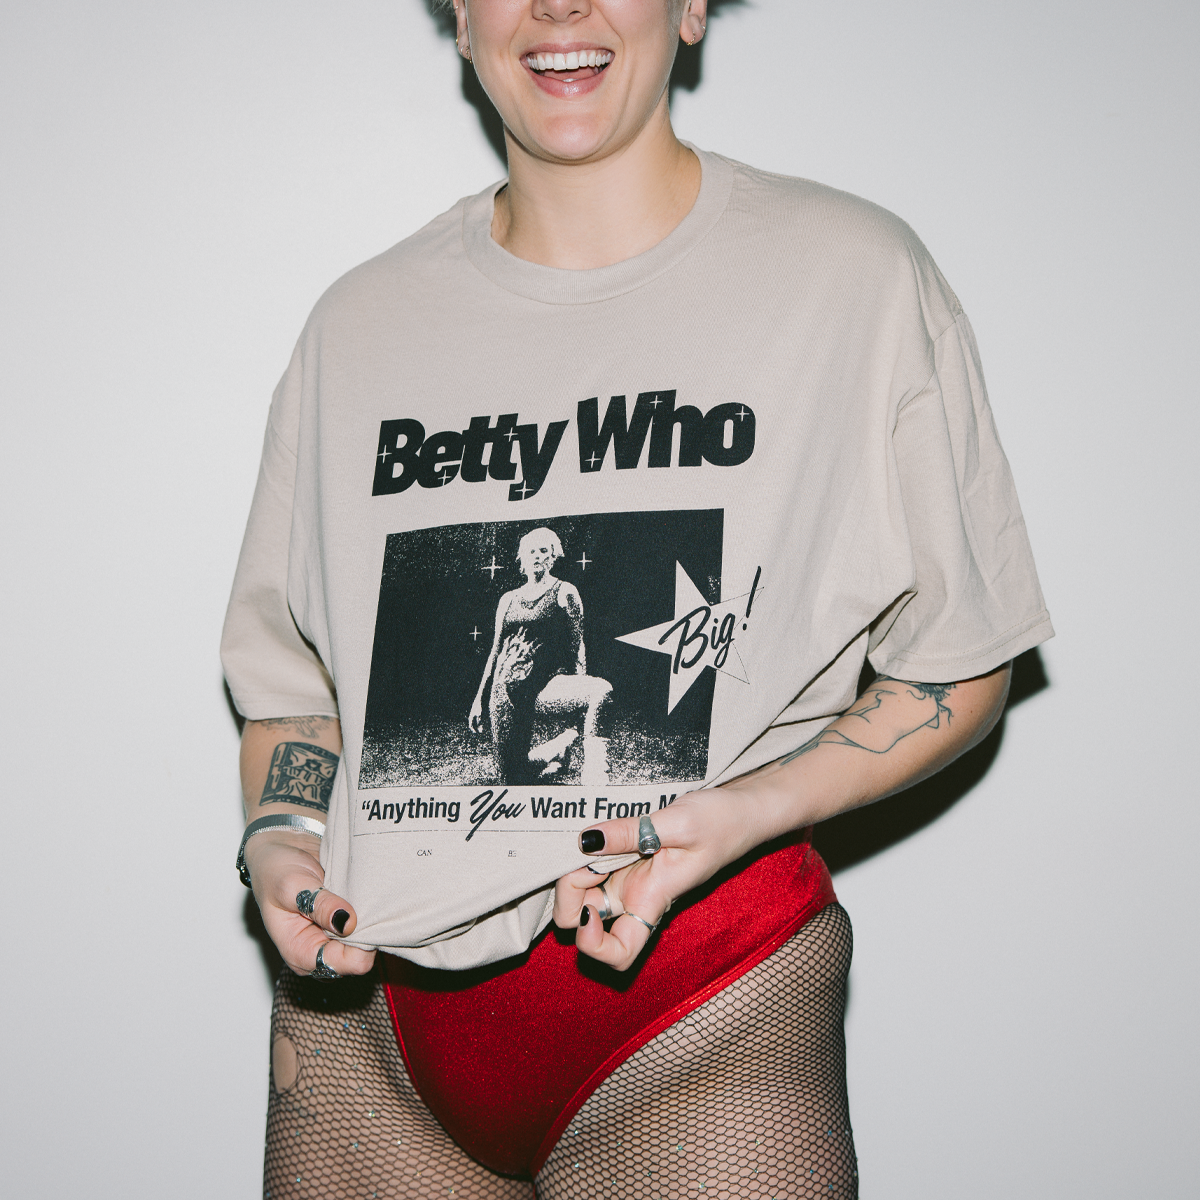 Image of Betty Who wearing one of her tour t-shirts